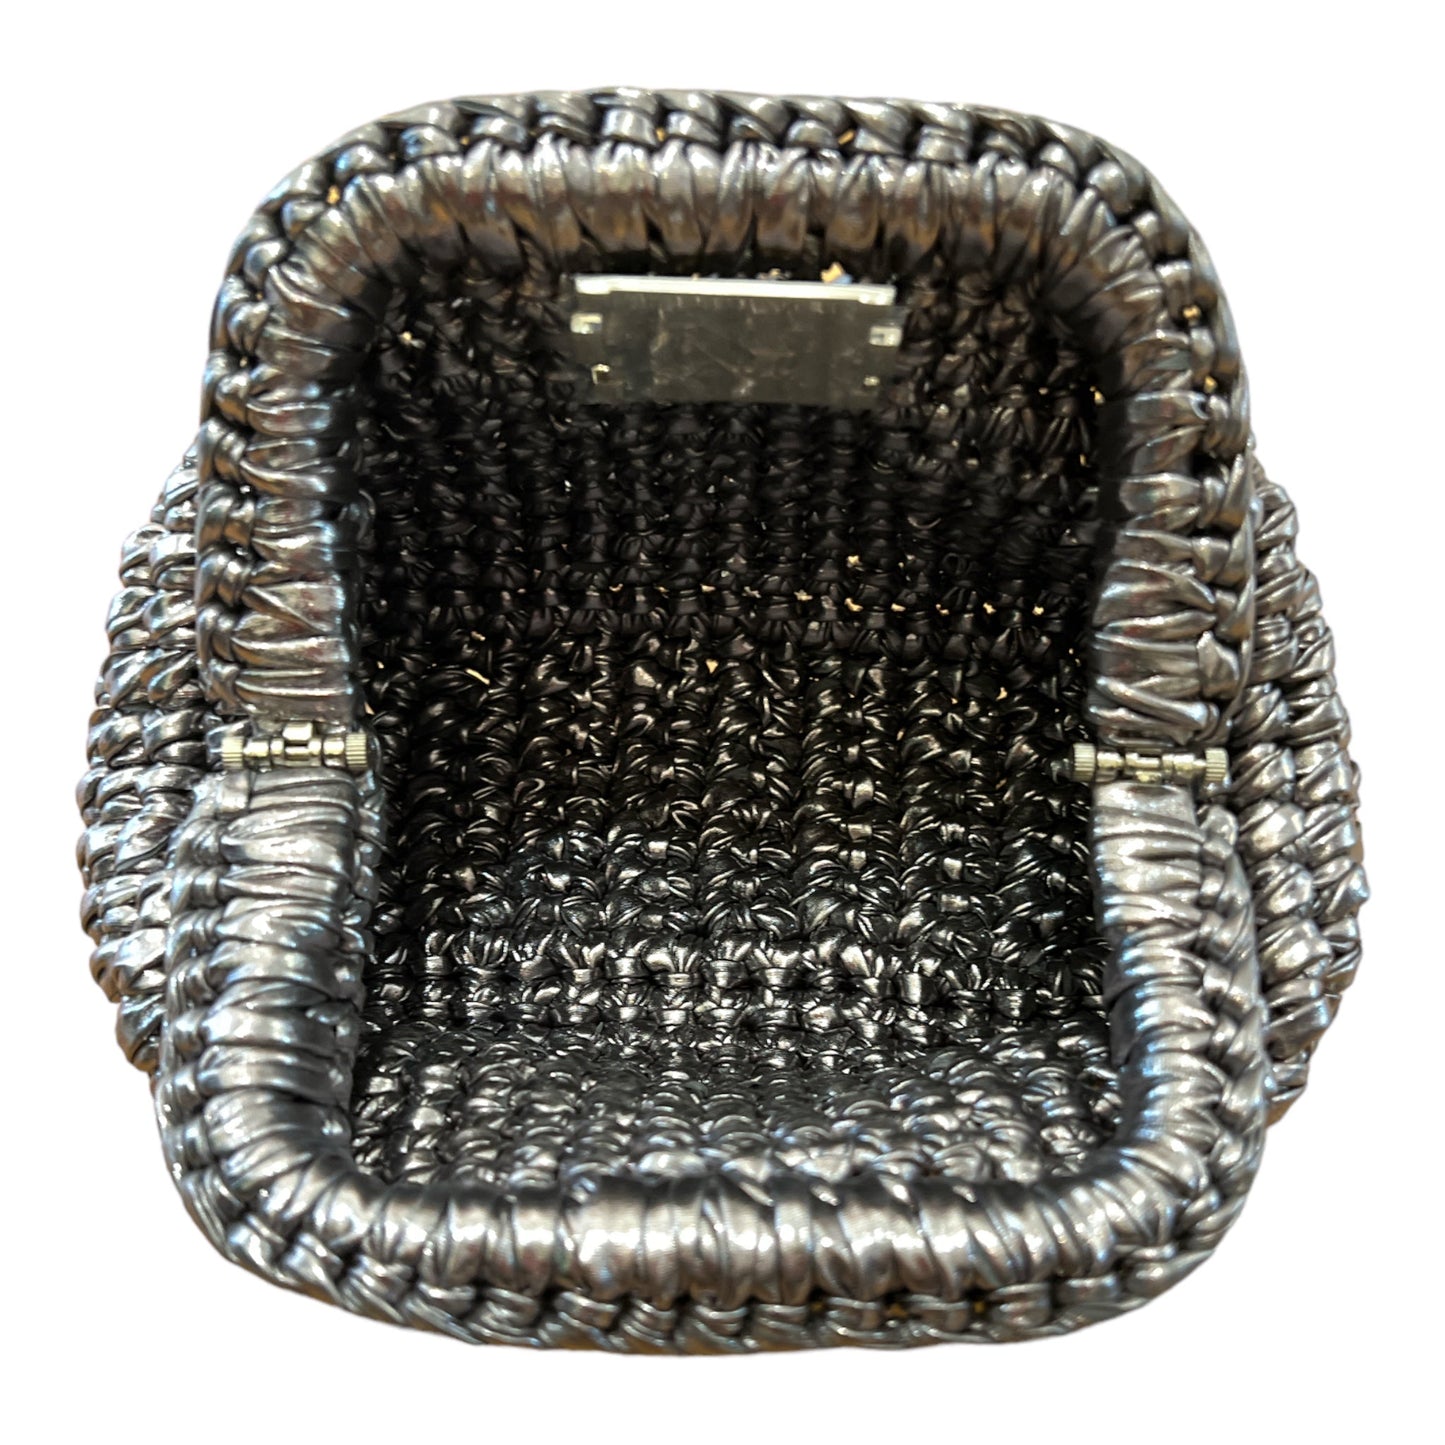 THE AMBER METTALIC BAG (SILVER) - Something about Sofia